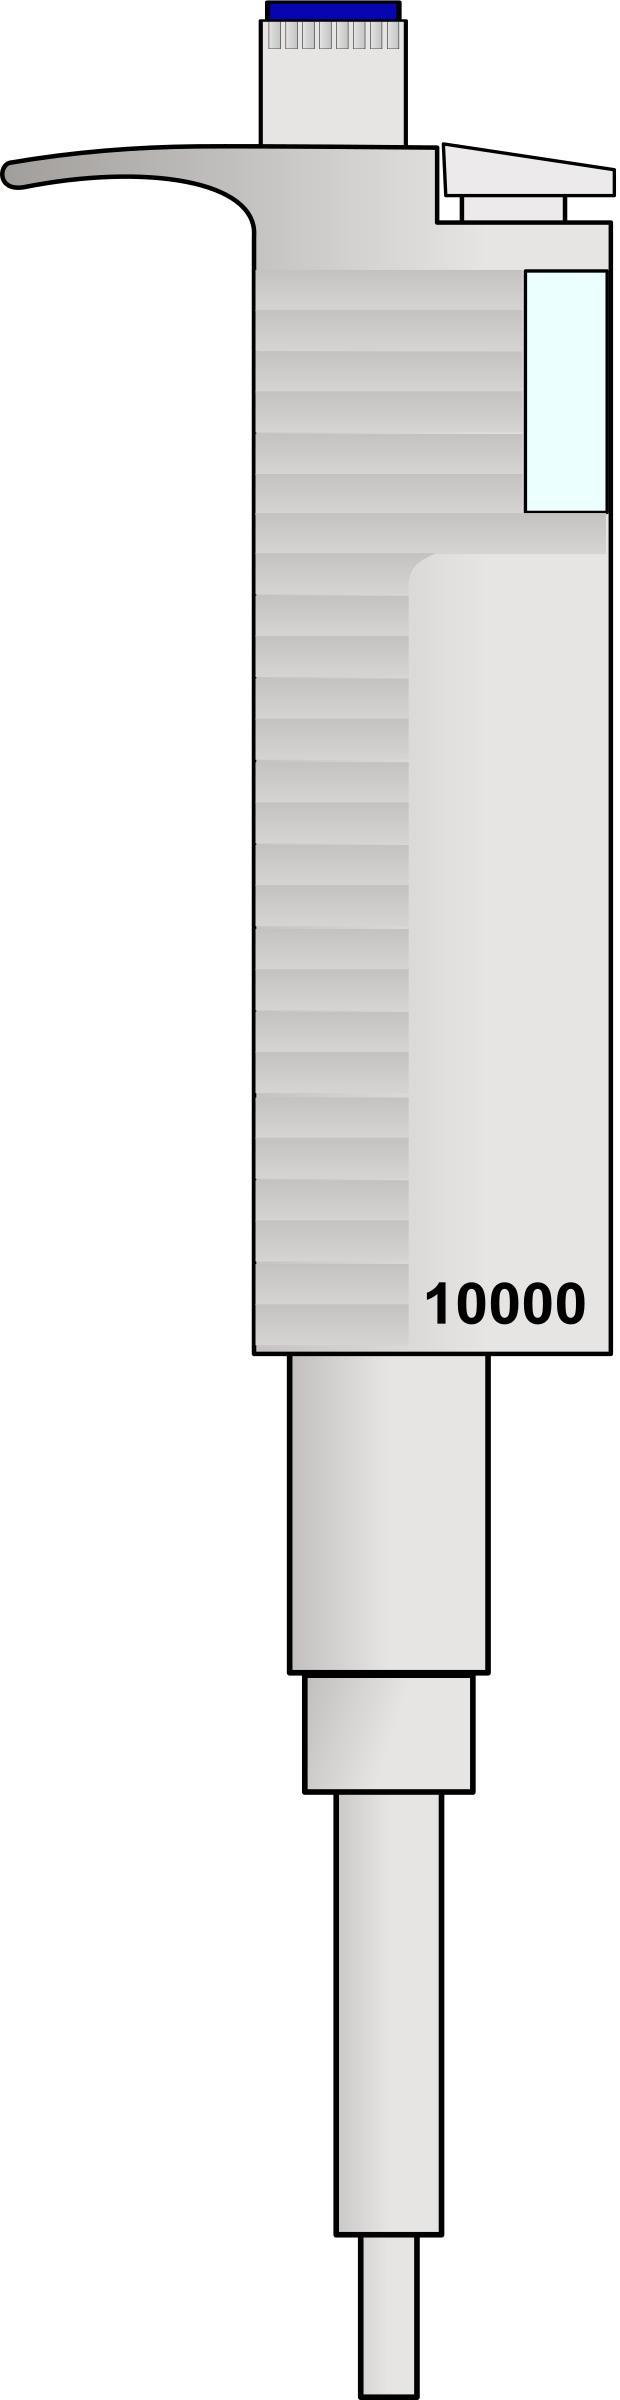 Eppendorf automatic pipette png transparent